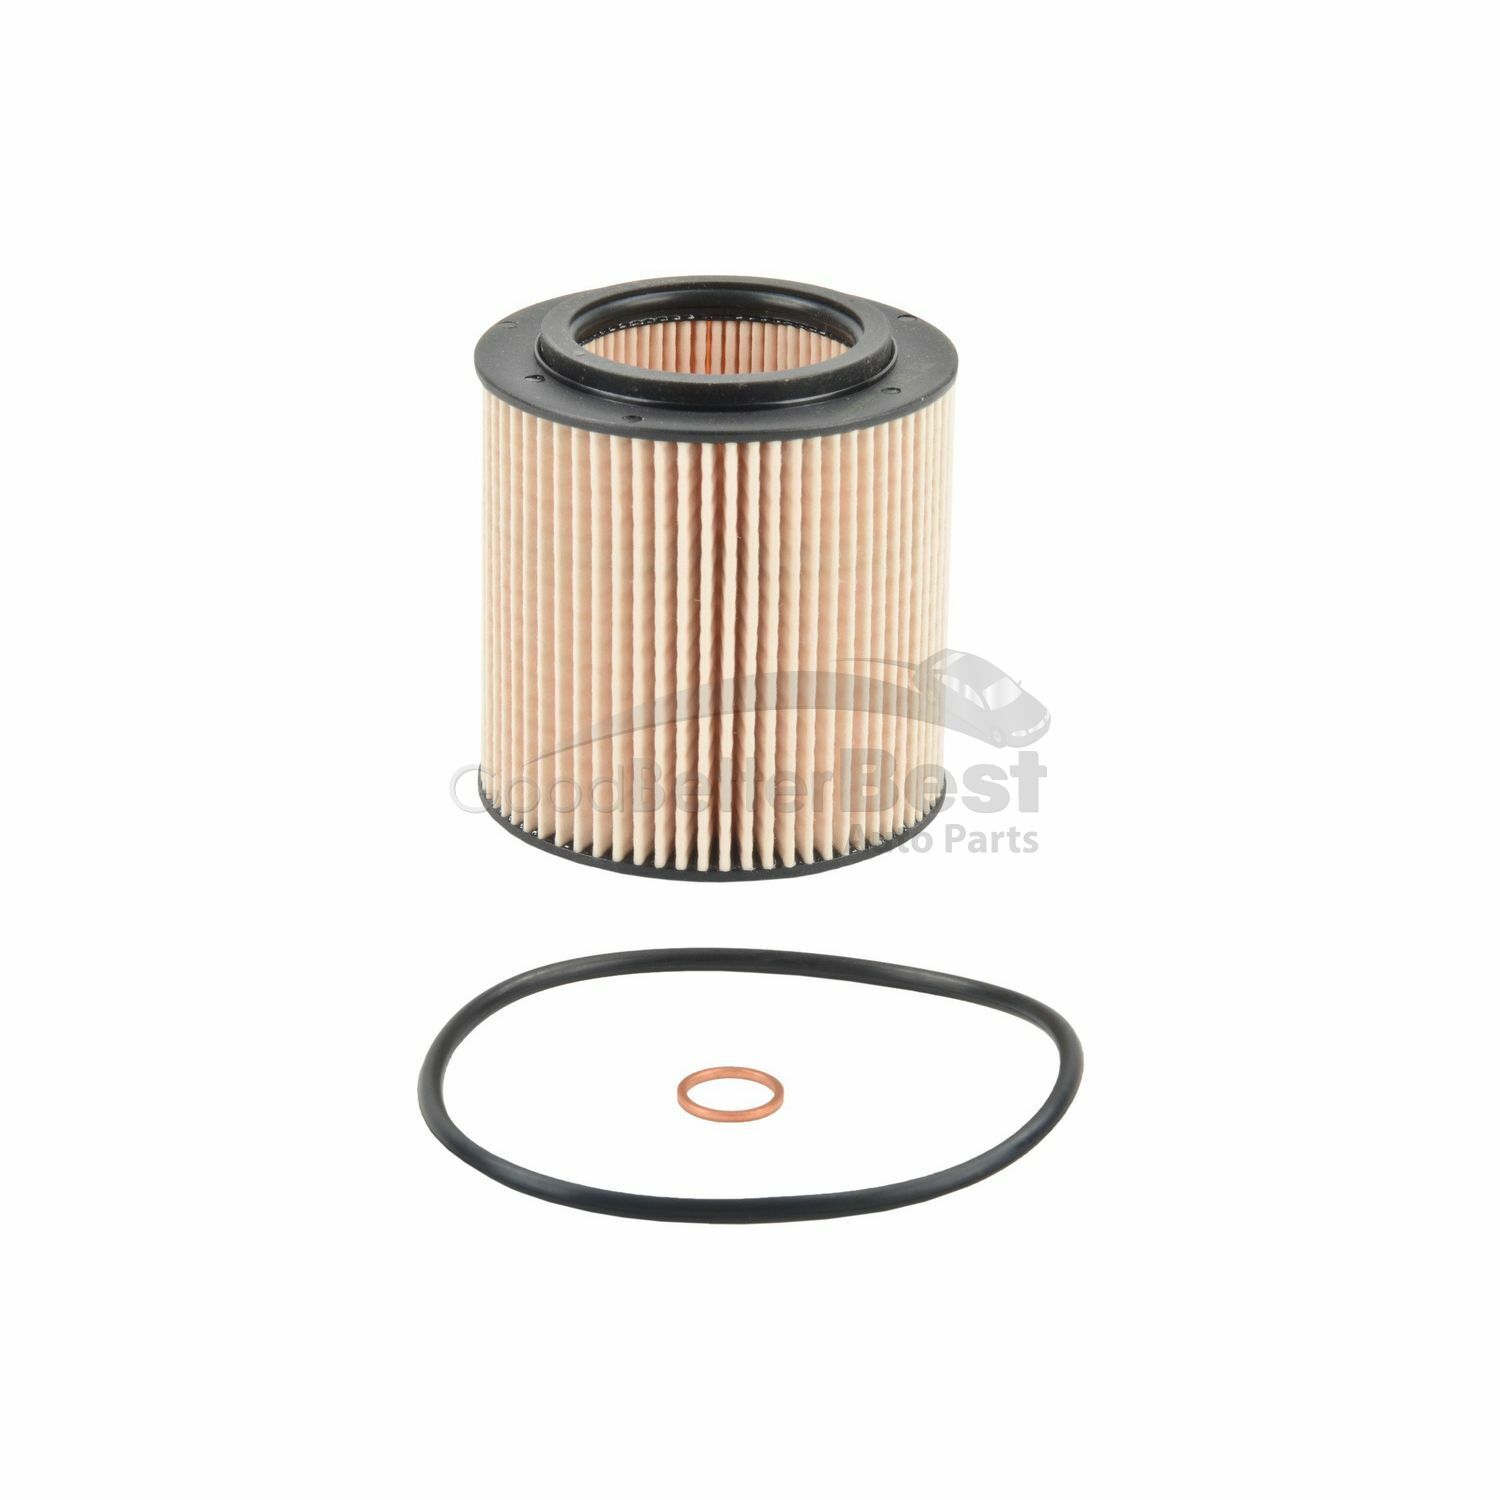 One New Bosch Engine Oil Filter 3307 for BMW